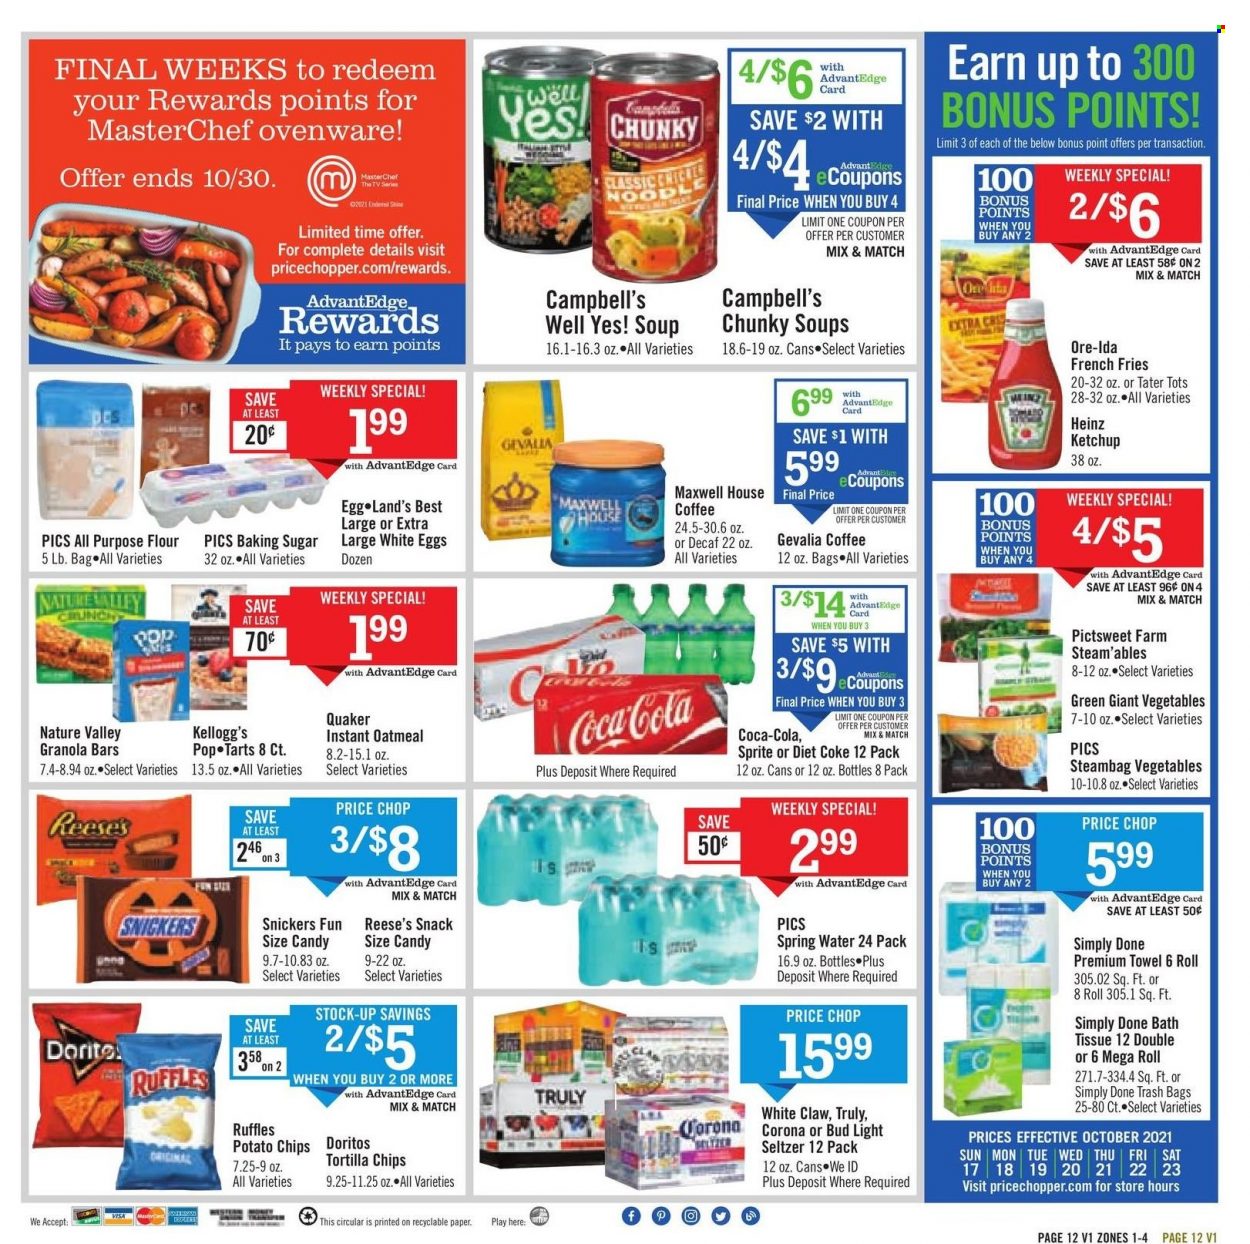 thumbnail - Price Chopper Flyer - 10/17/2021 - 10/23/2021 - Sales products - Campbell's, soup, Quaker, noodles, eggs, Reese's, potato fries, french fries, Ore-Ida, tater tots, snack, Snickers, Kellogg's, Doritos, tortilla chips, potato chips, chips, Ruffles, sugar, oatmeal, Heinz, granola bar, Nature Valley, ketchup, Coca-Cola, Sprite, Diet Coke, seltzer water, spring water, Maxwell House, coffee, Gevalia, White Claw, TRULY, beer, Bud Light, Corona Extra, bath tissue. Page 12.